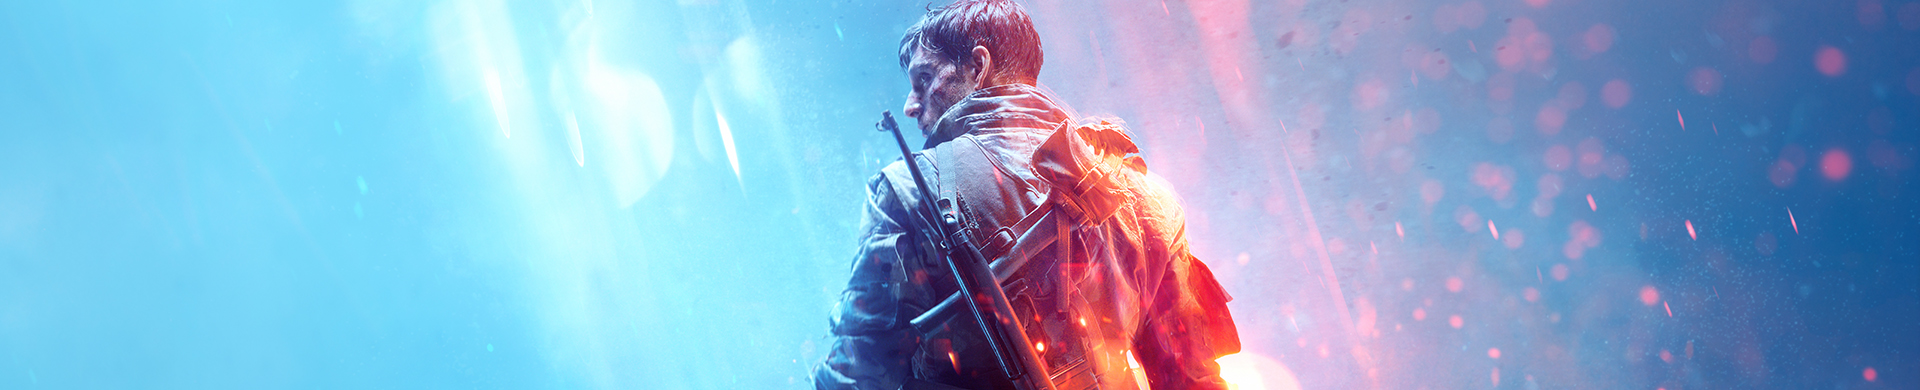 BATTLEFIELD™ V OFFICIALLY LAUNCHES – VIRTUOS ART TEAM’S WORK FEATURED